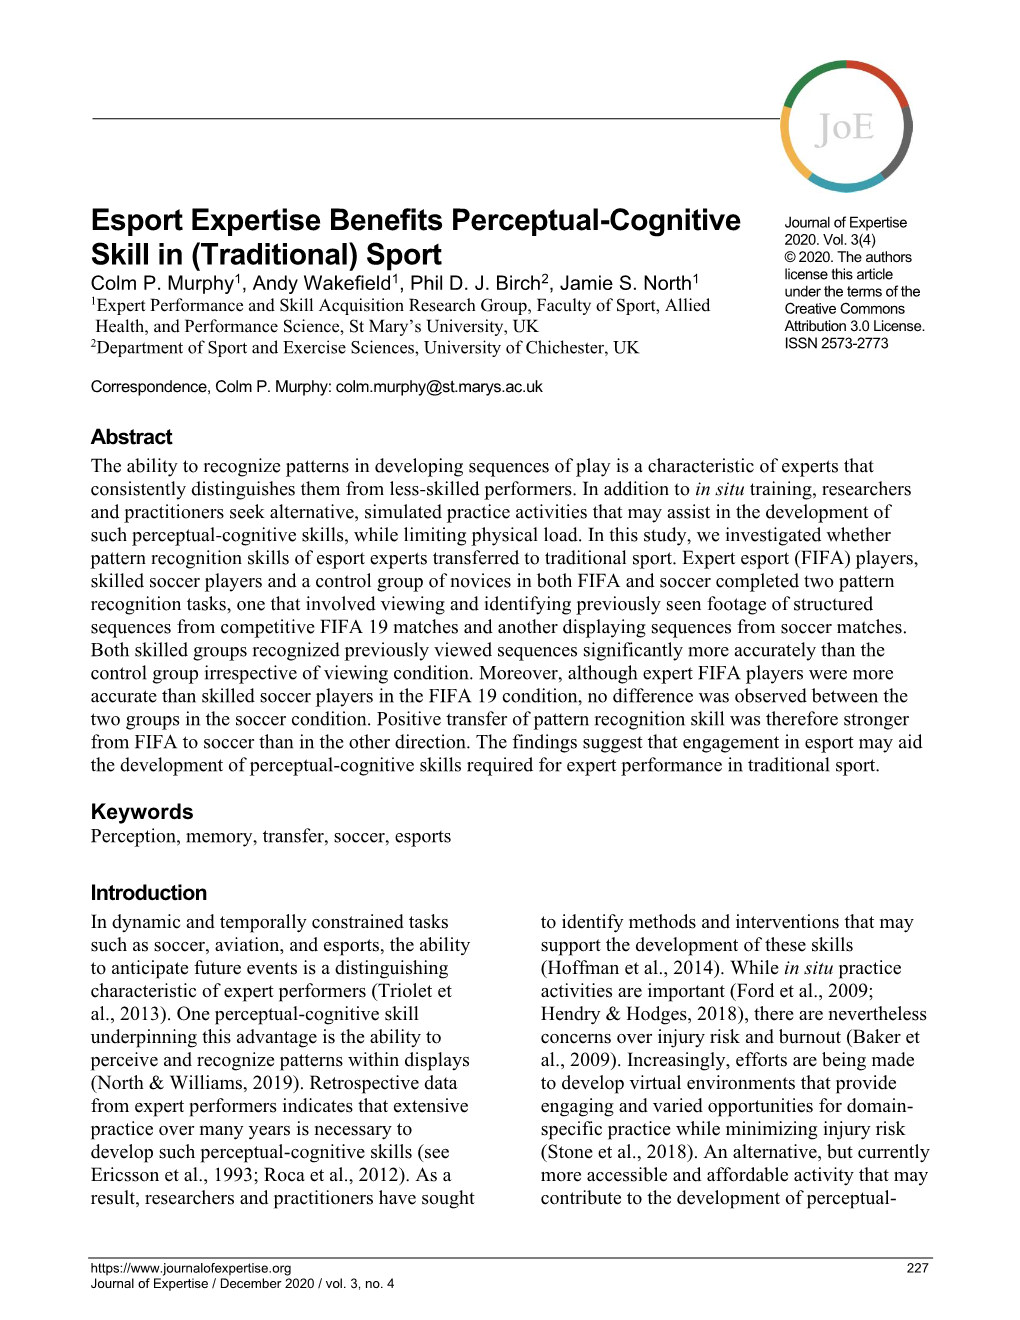 Esport Expertise Benefits Perceptual-Cognitive Skill In